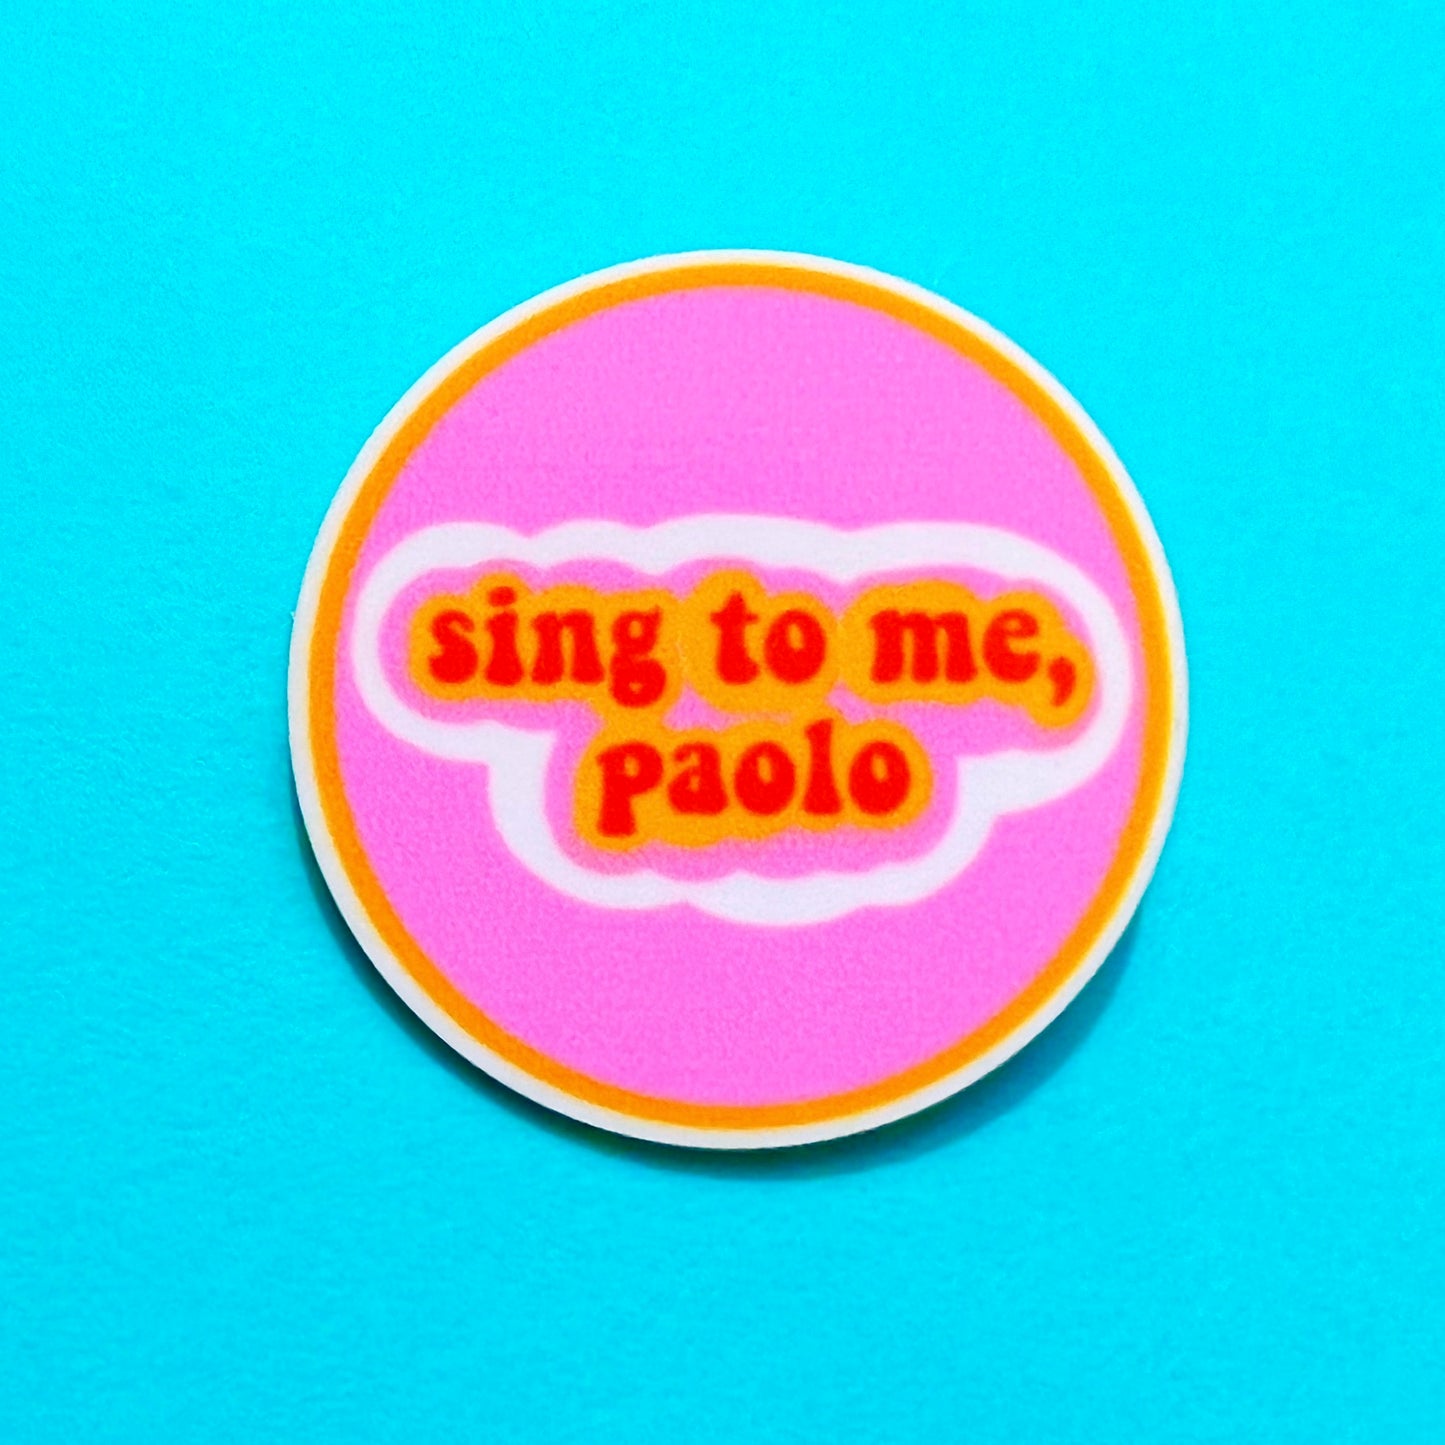 Sing To Me Paolo Pin